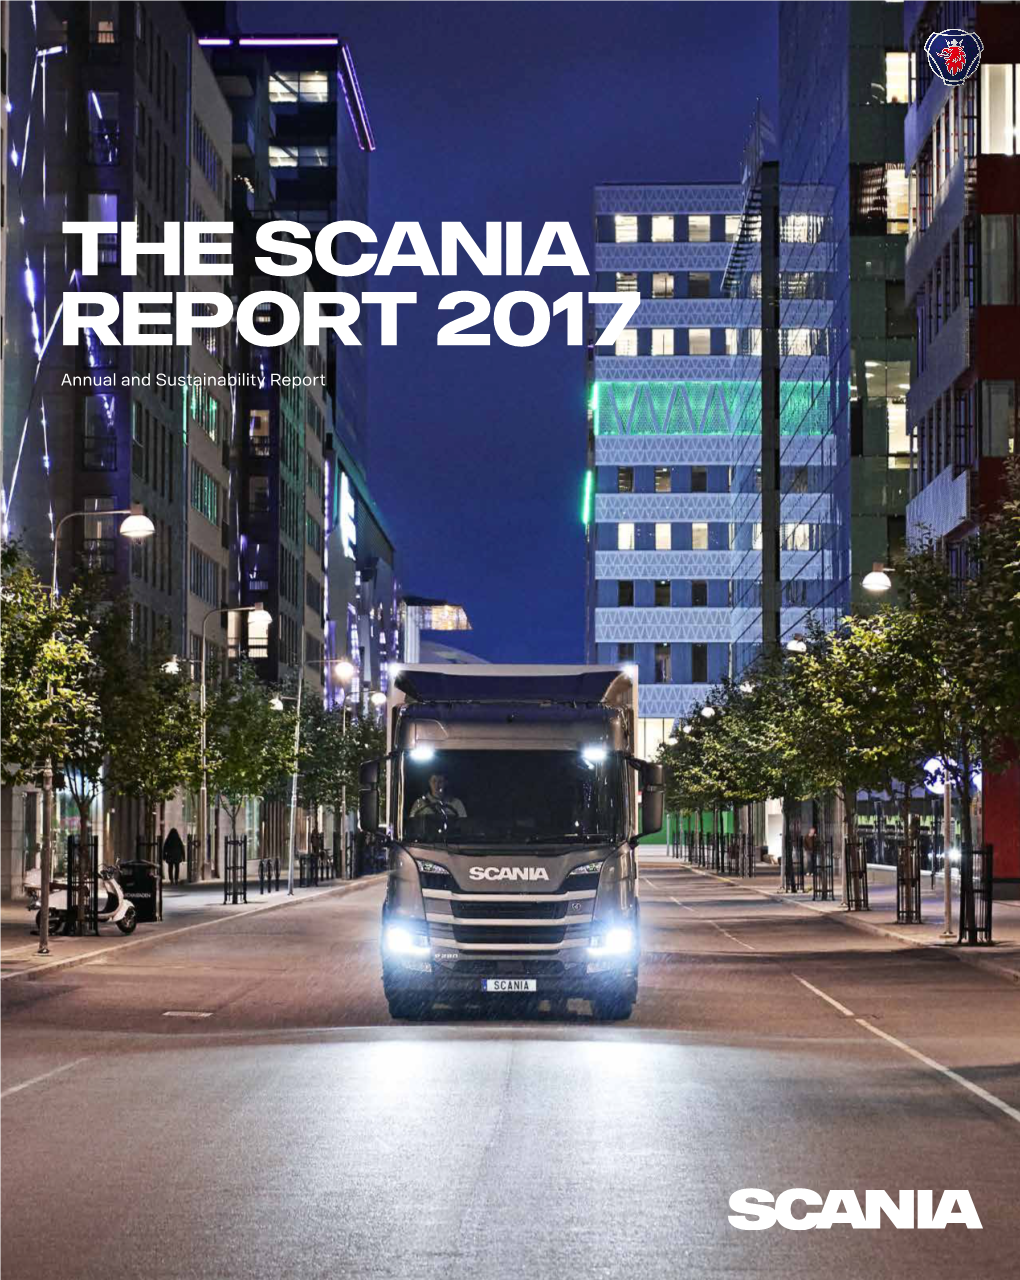 Scania Annual and Sustainability Report 2017